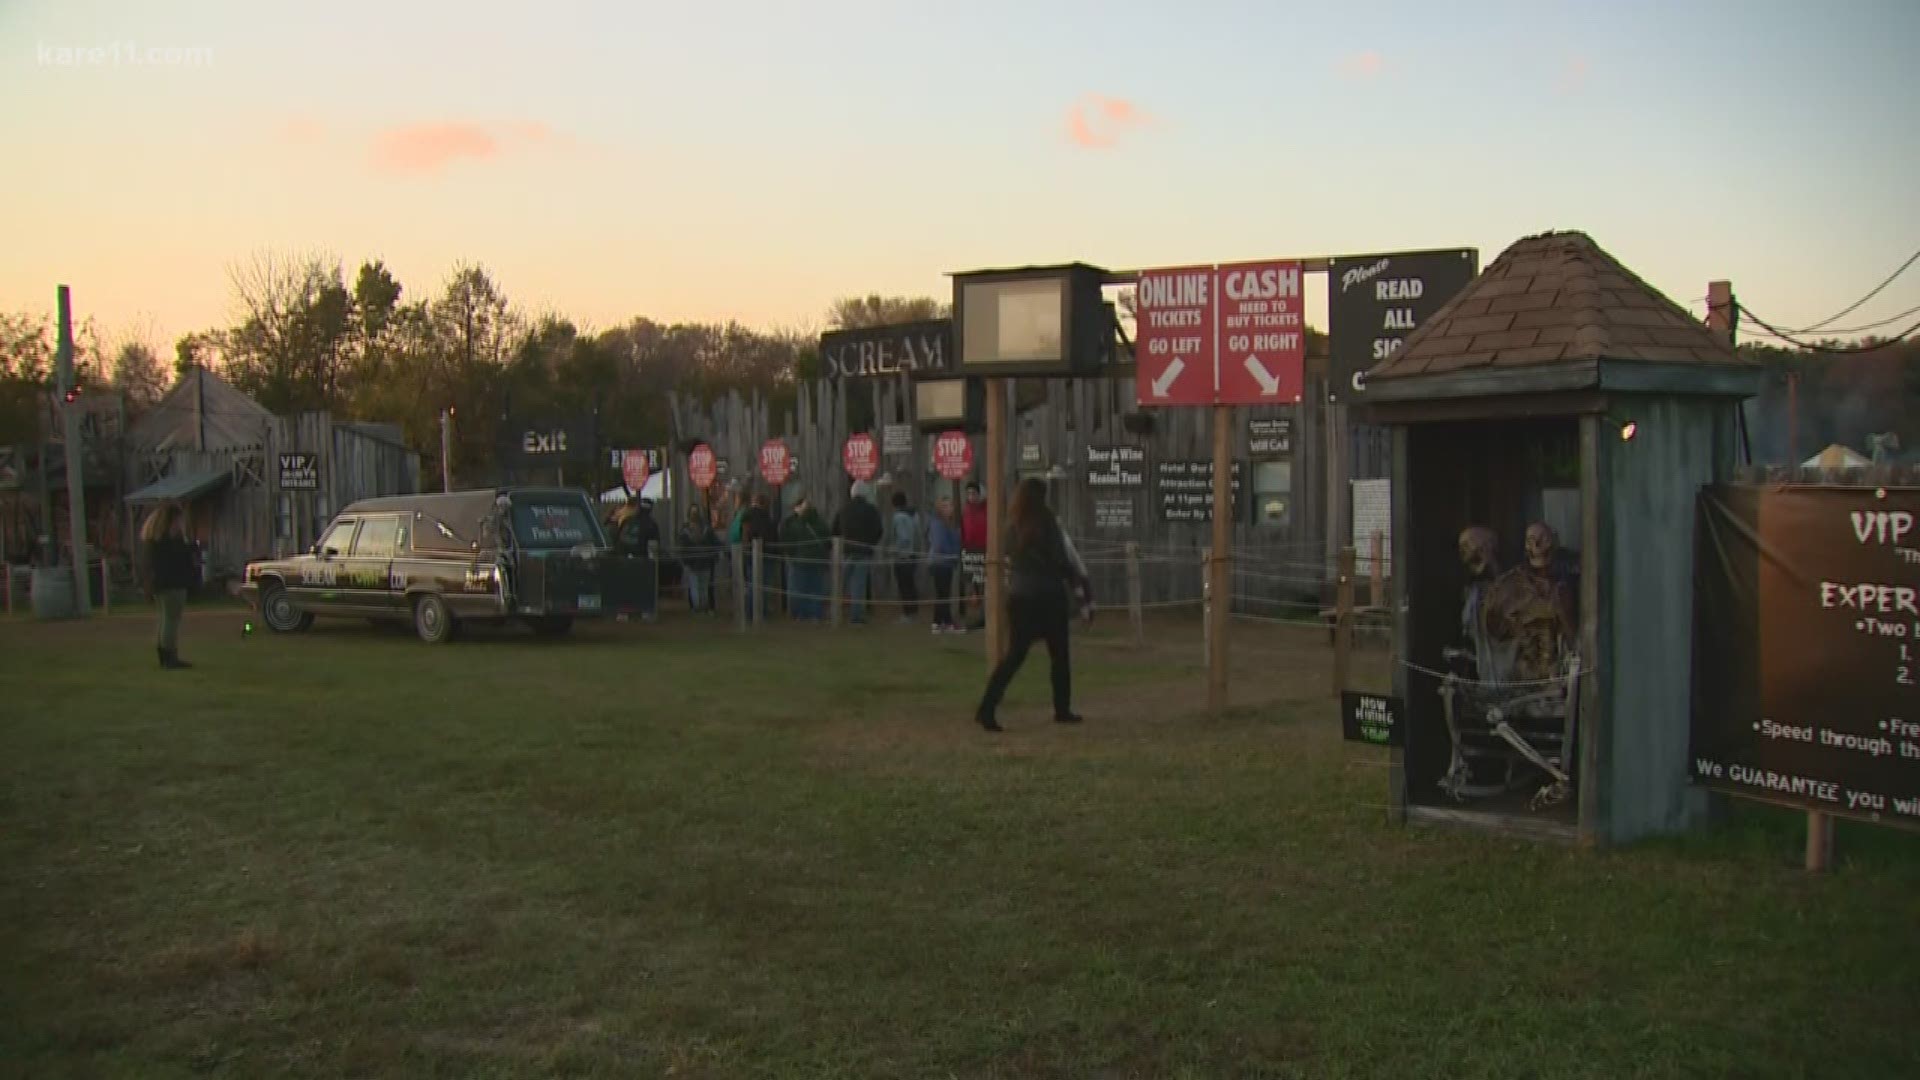 Scream Town reopens with new security